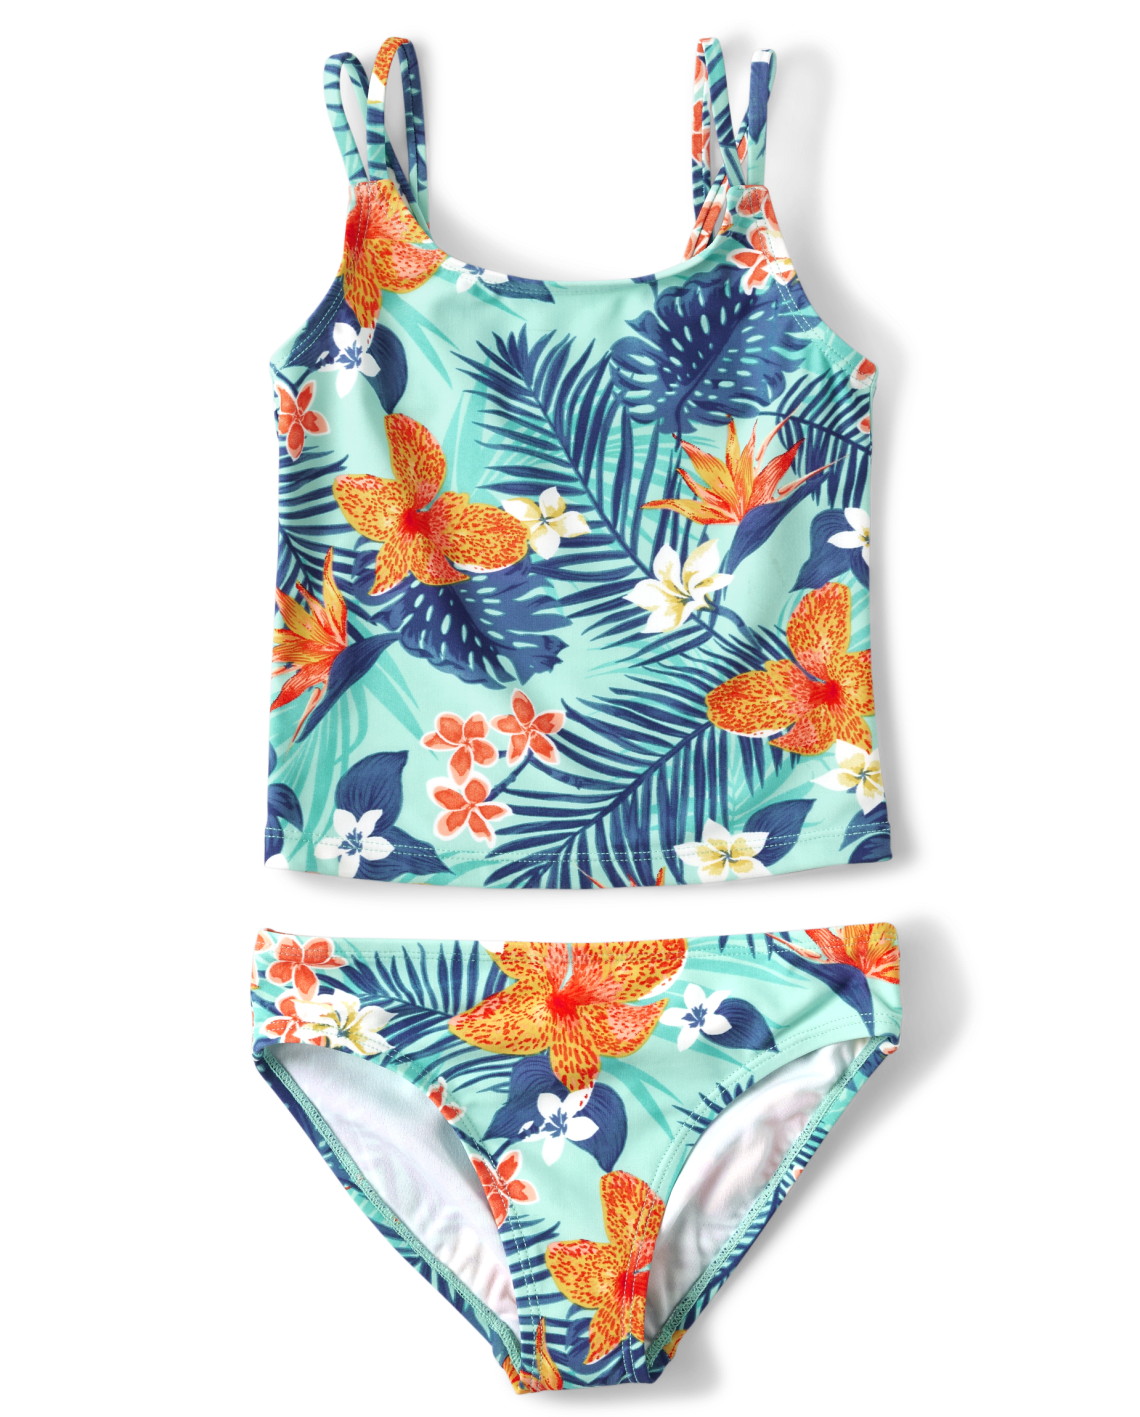 The Children's Place Girls Matching Family Tropical Tankini Swimsuit